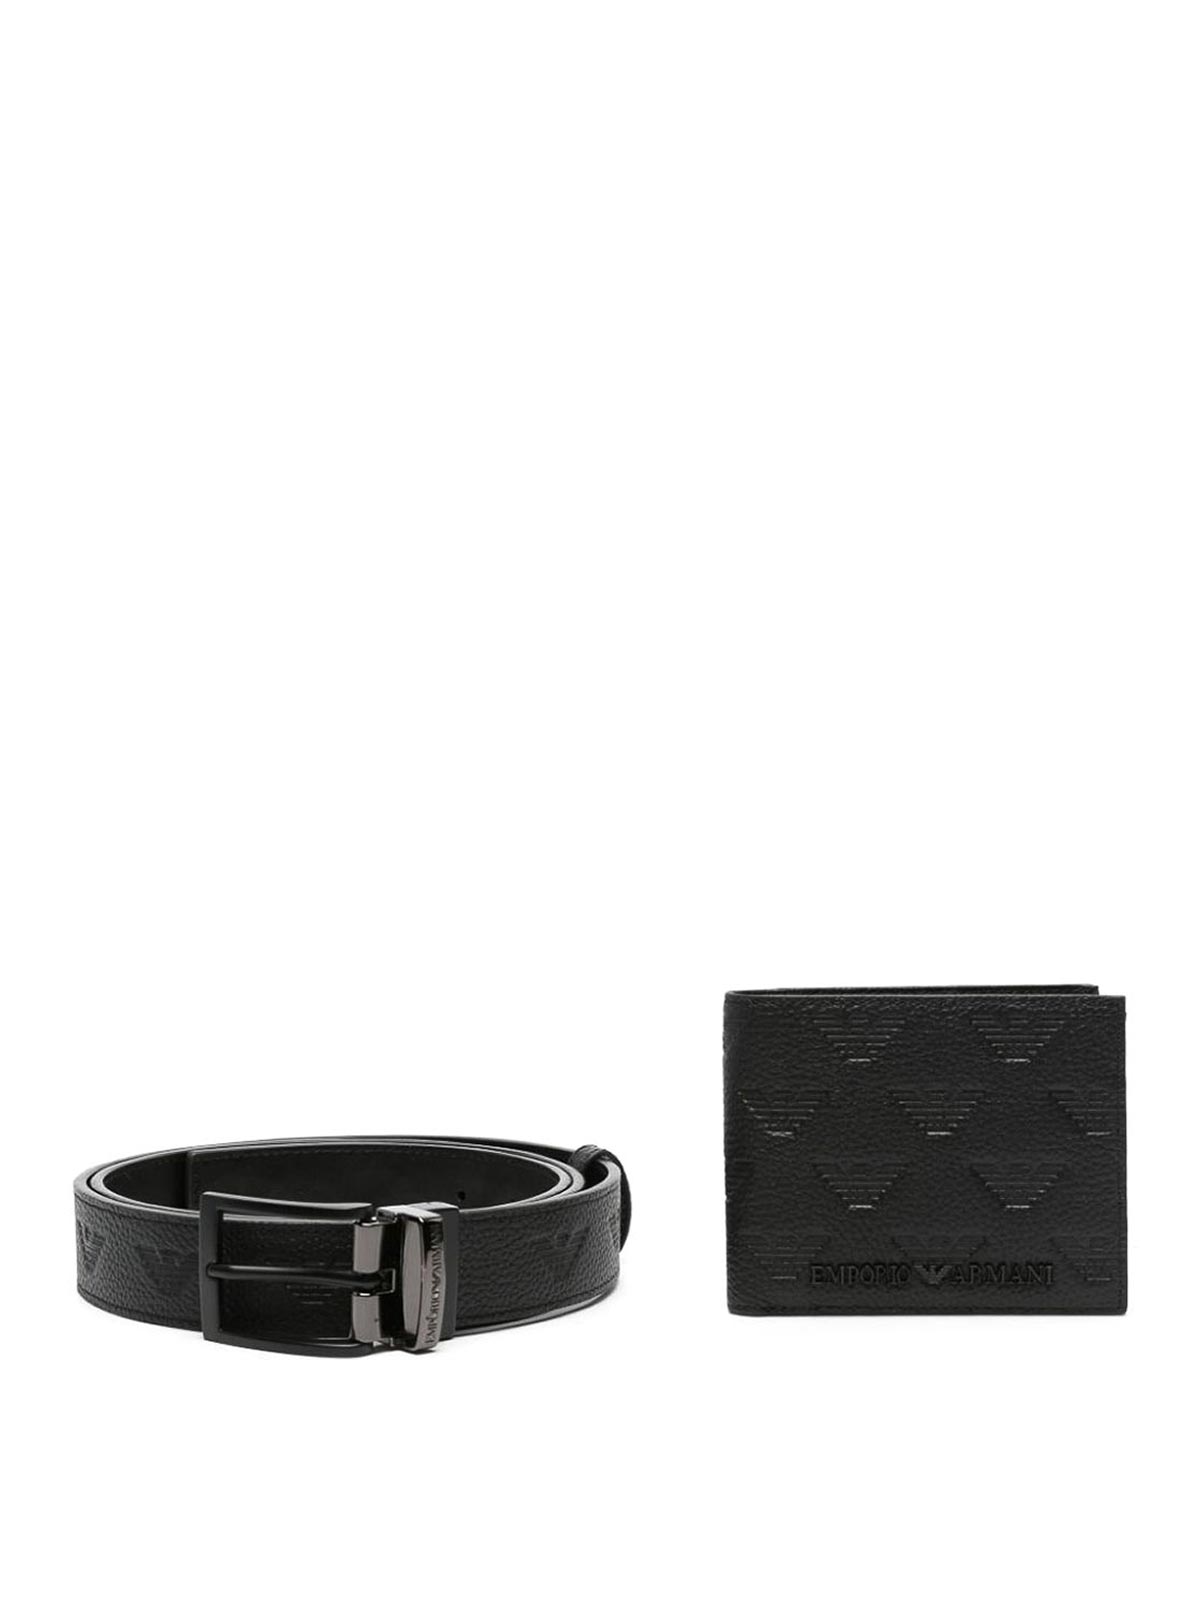 Shop Emporio Armani Belt And Wallet Leather Set In Black